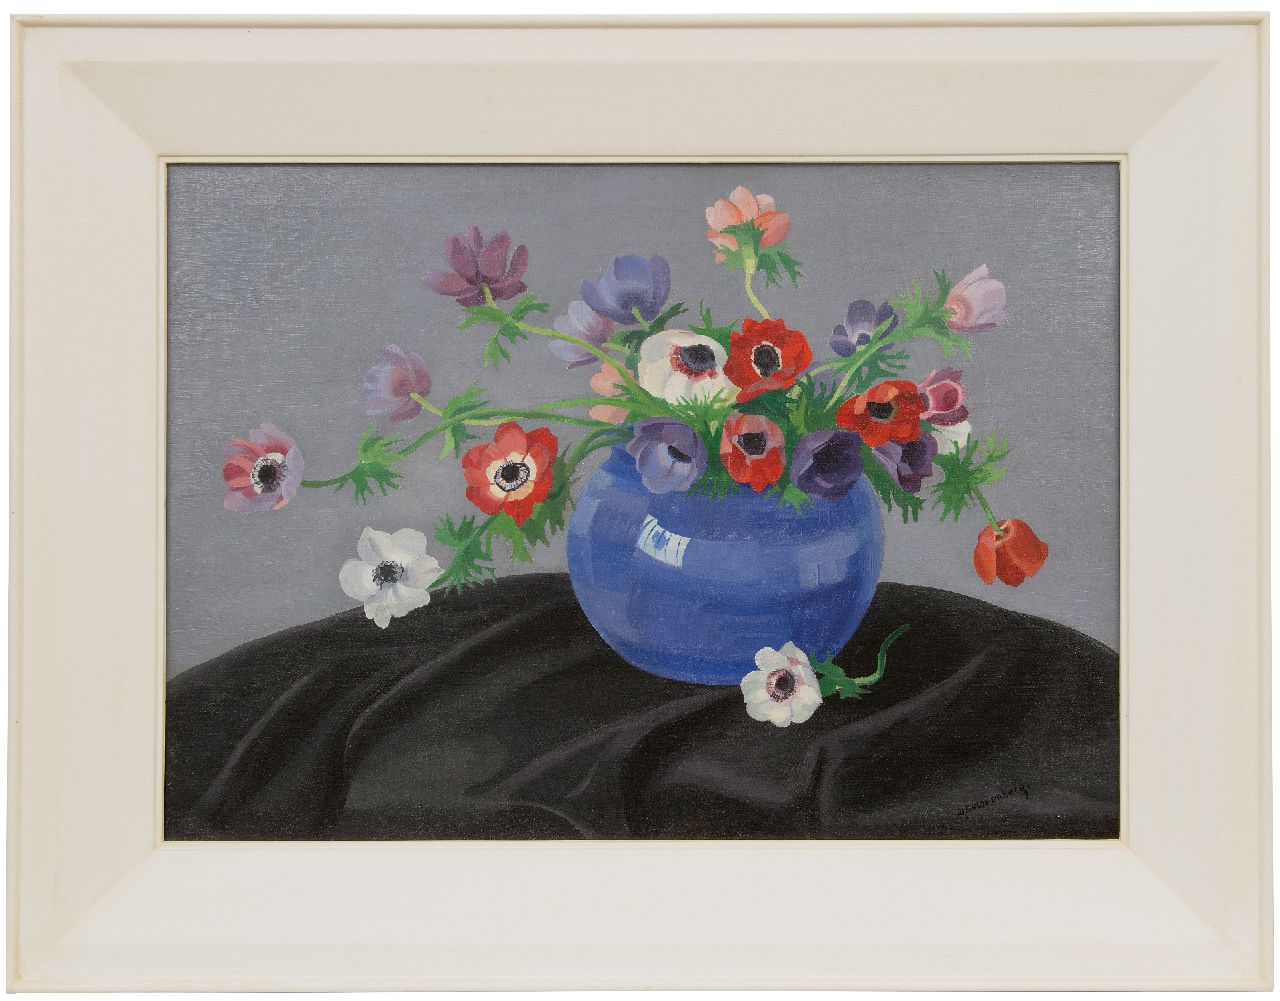 Smorenberg D.  | Dirk Smorenberg | Paintings offered for sale | Anemones in a Vase, oil on canvas 50.0 x 70.2 cm, signed l.r.